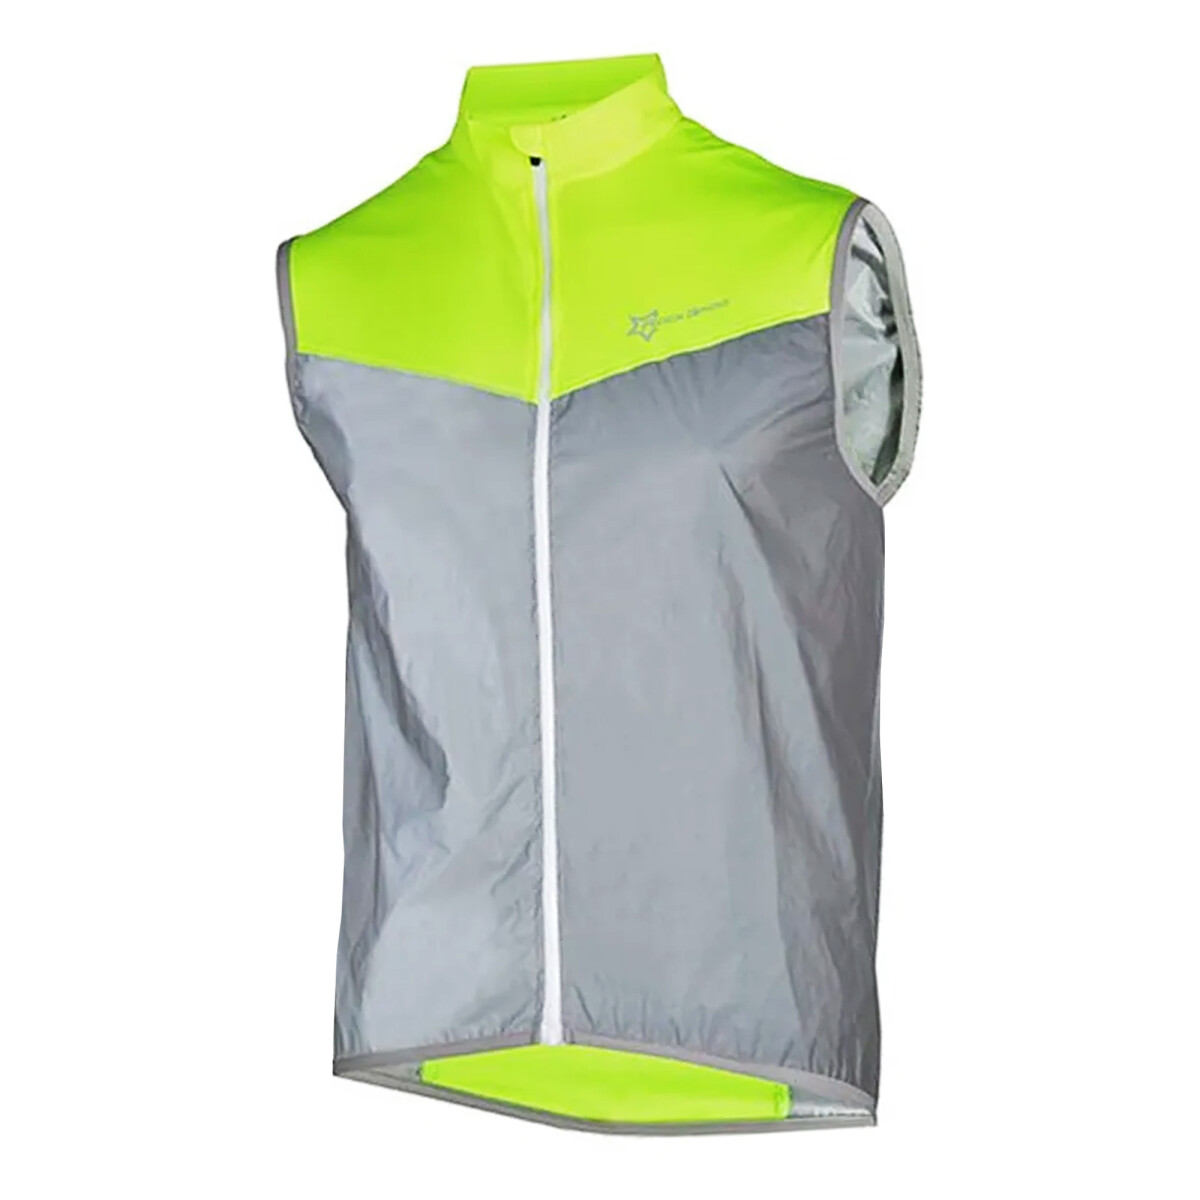 Rockbros - Chaleco Ciclista Unisex FGY1001 - Reflectante. Impermeable. Rompeviento. M. - 001 